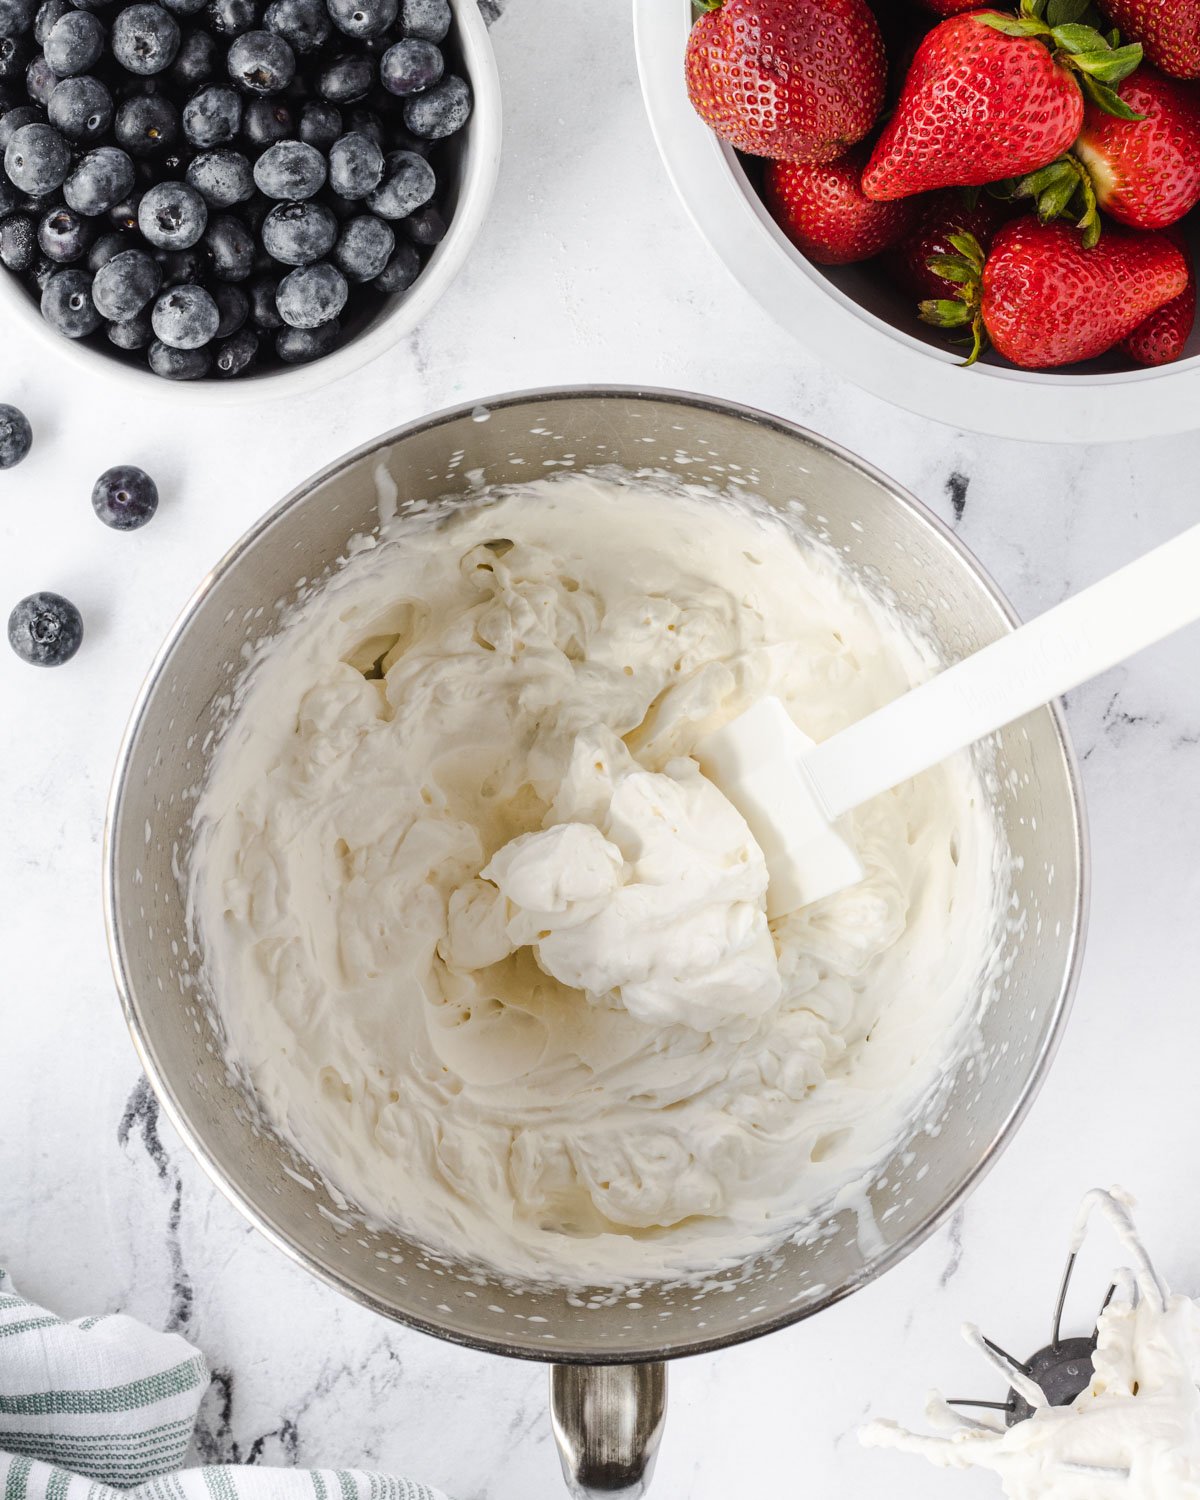 Whipped cream in a bowl, with smaller bowls of blueberries and strawberries at the top of the photo.